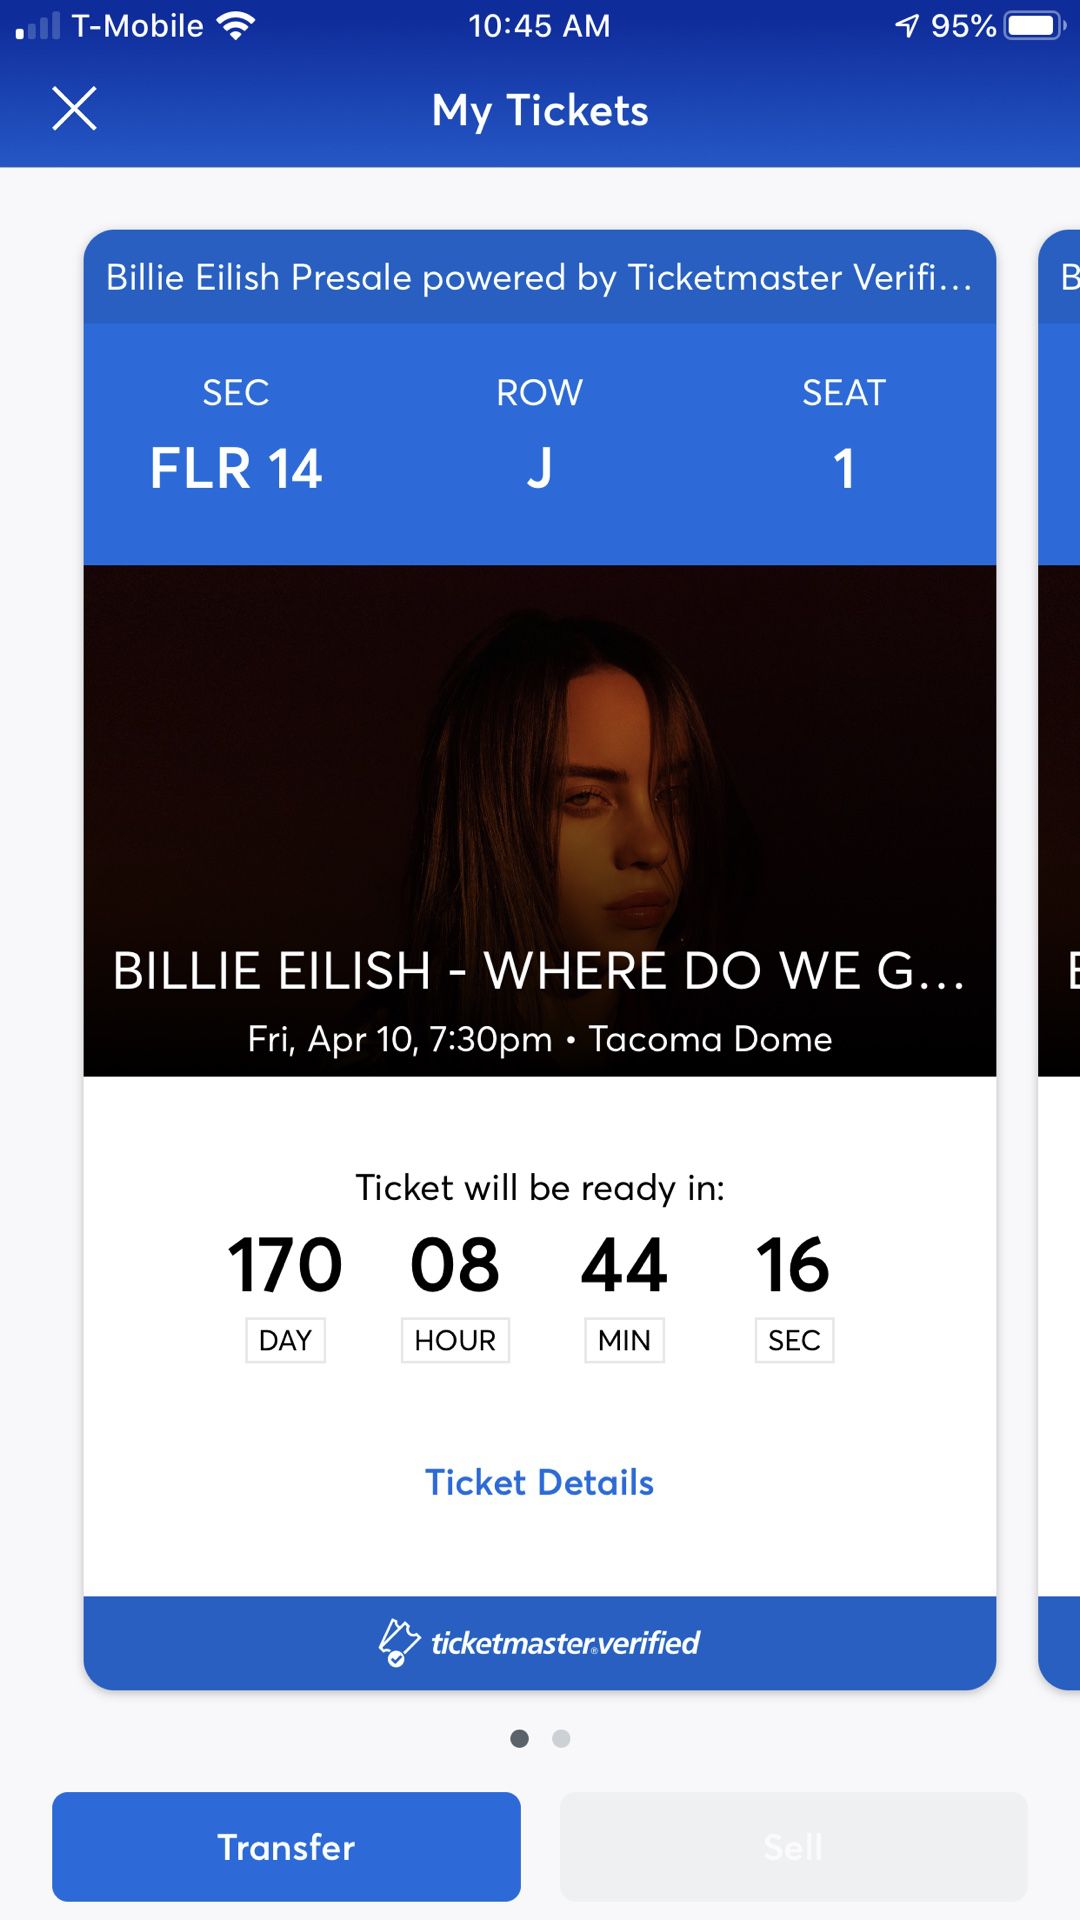 Billie Eilish “SOLD OUT” Floor Seats Tacoma Dome April 10th